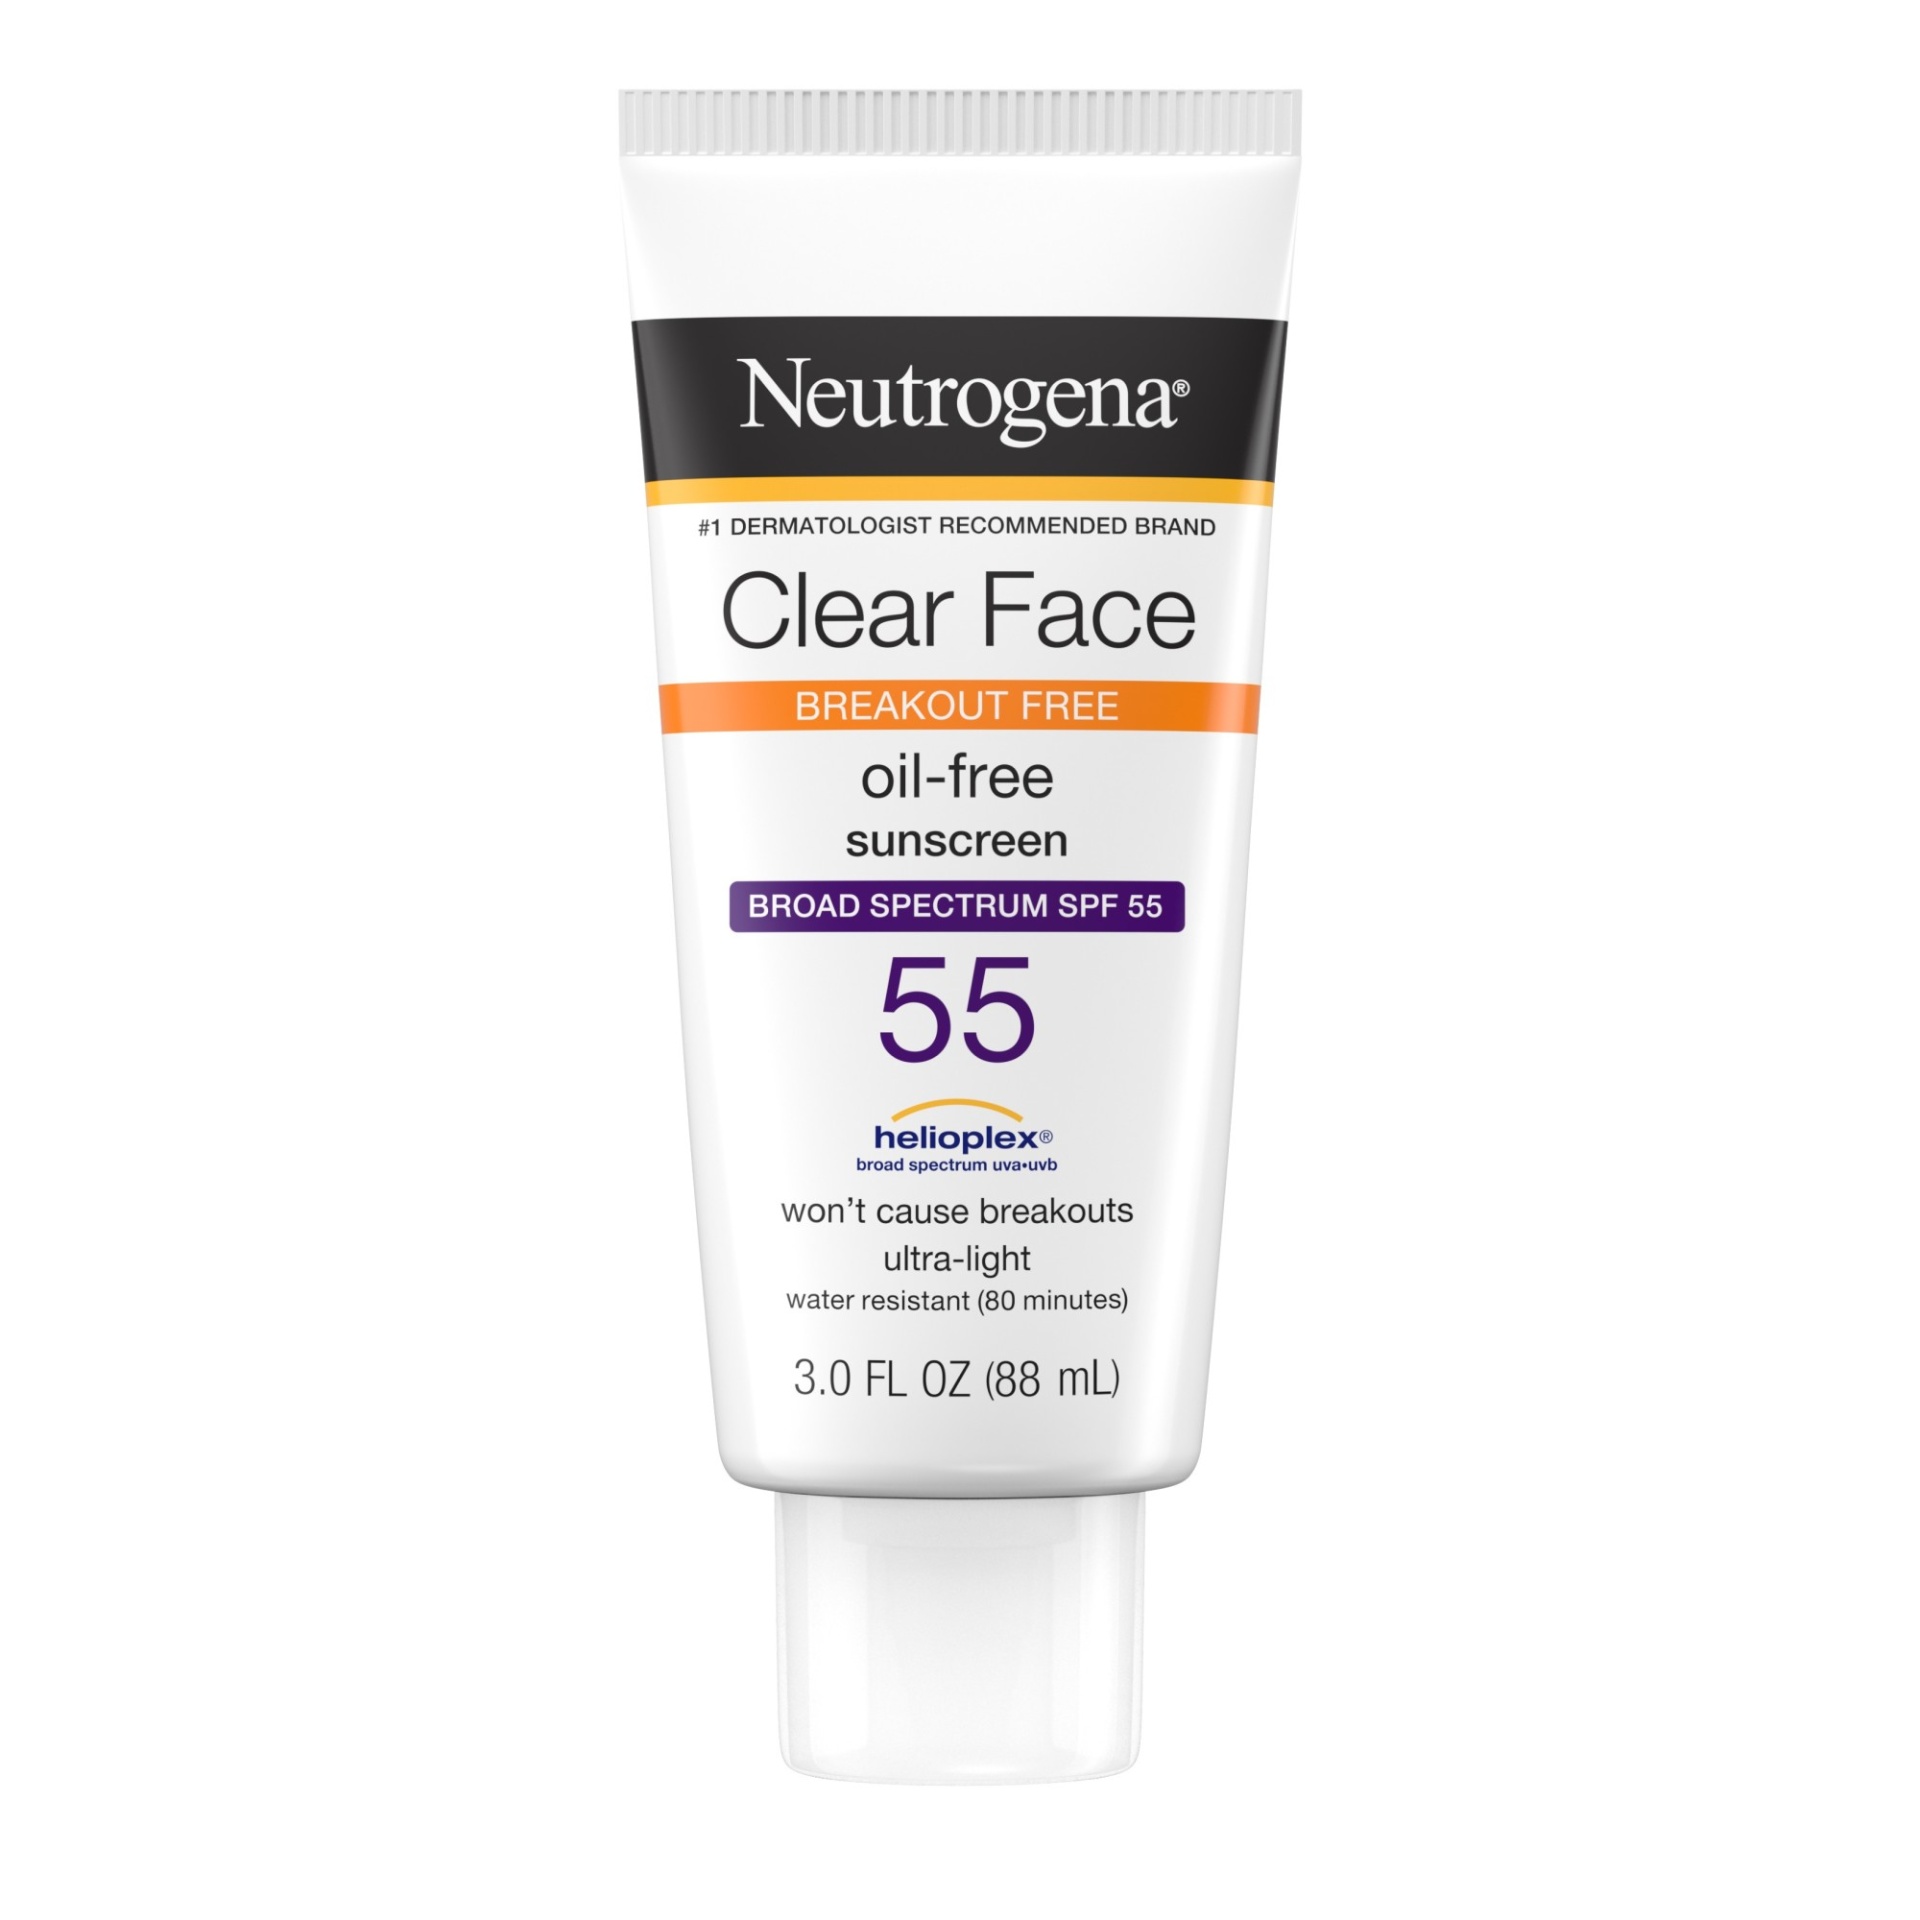 slide 1 of 6, Neutrogena Clear Face Liquid Lotion Sunscreen for Acne-Prone Skin, Broad Spectrum SPF 55 with Helioplex Technology, Oil-Free, Fragrance-Free & Non-Comedogenic Facial Sunscreen, 3 oz